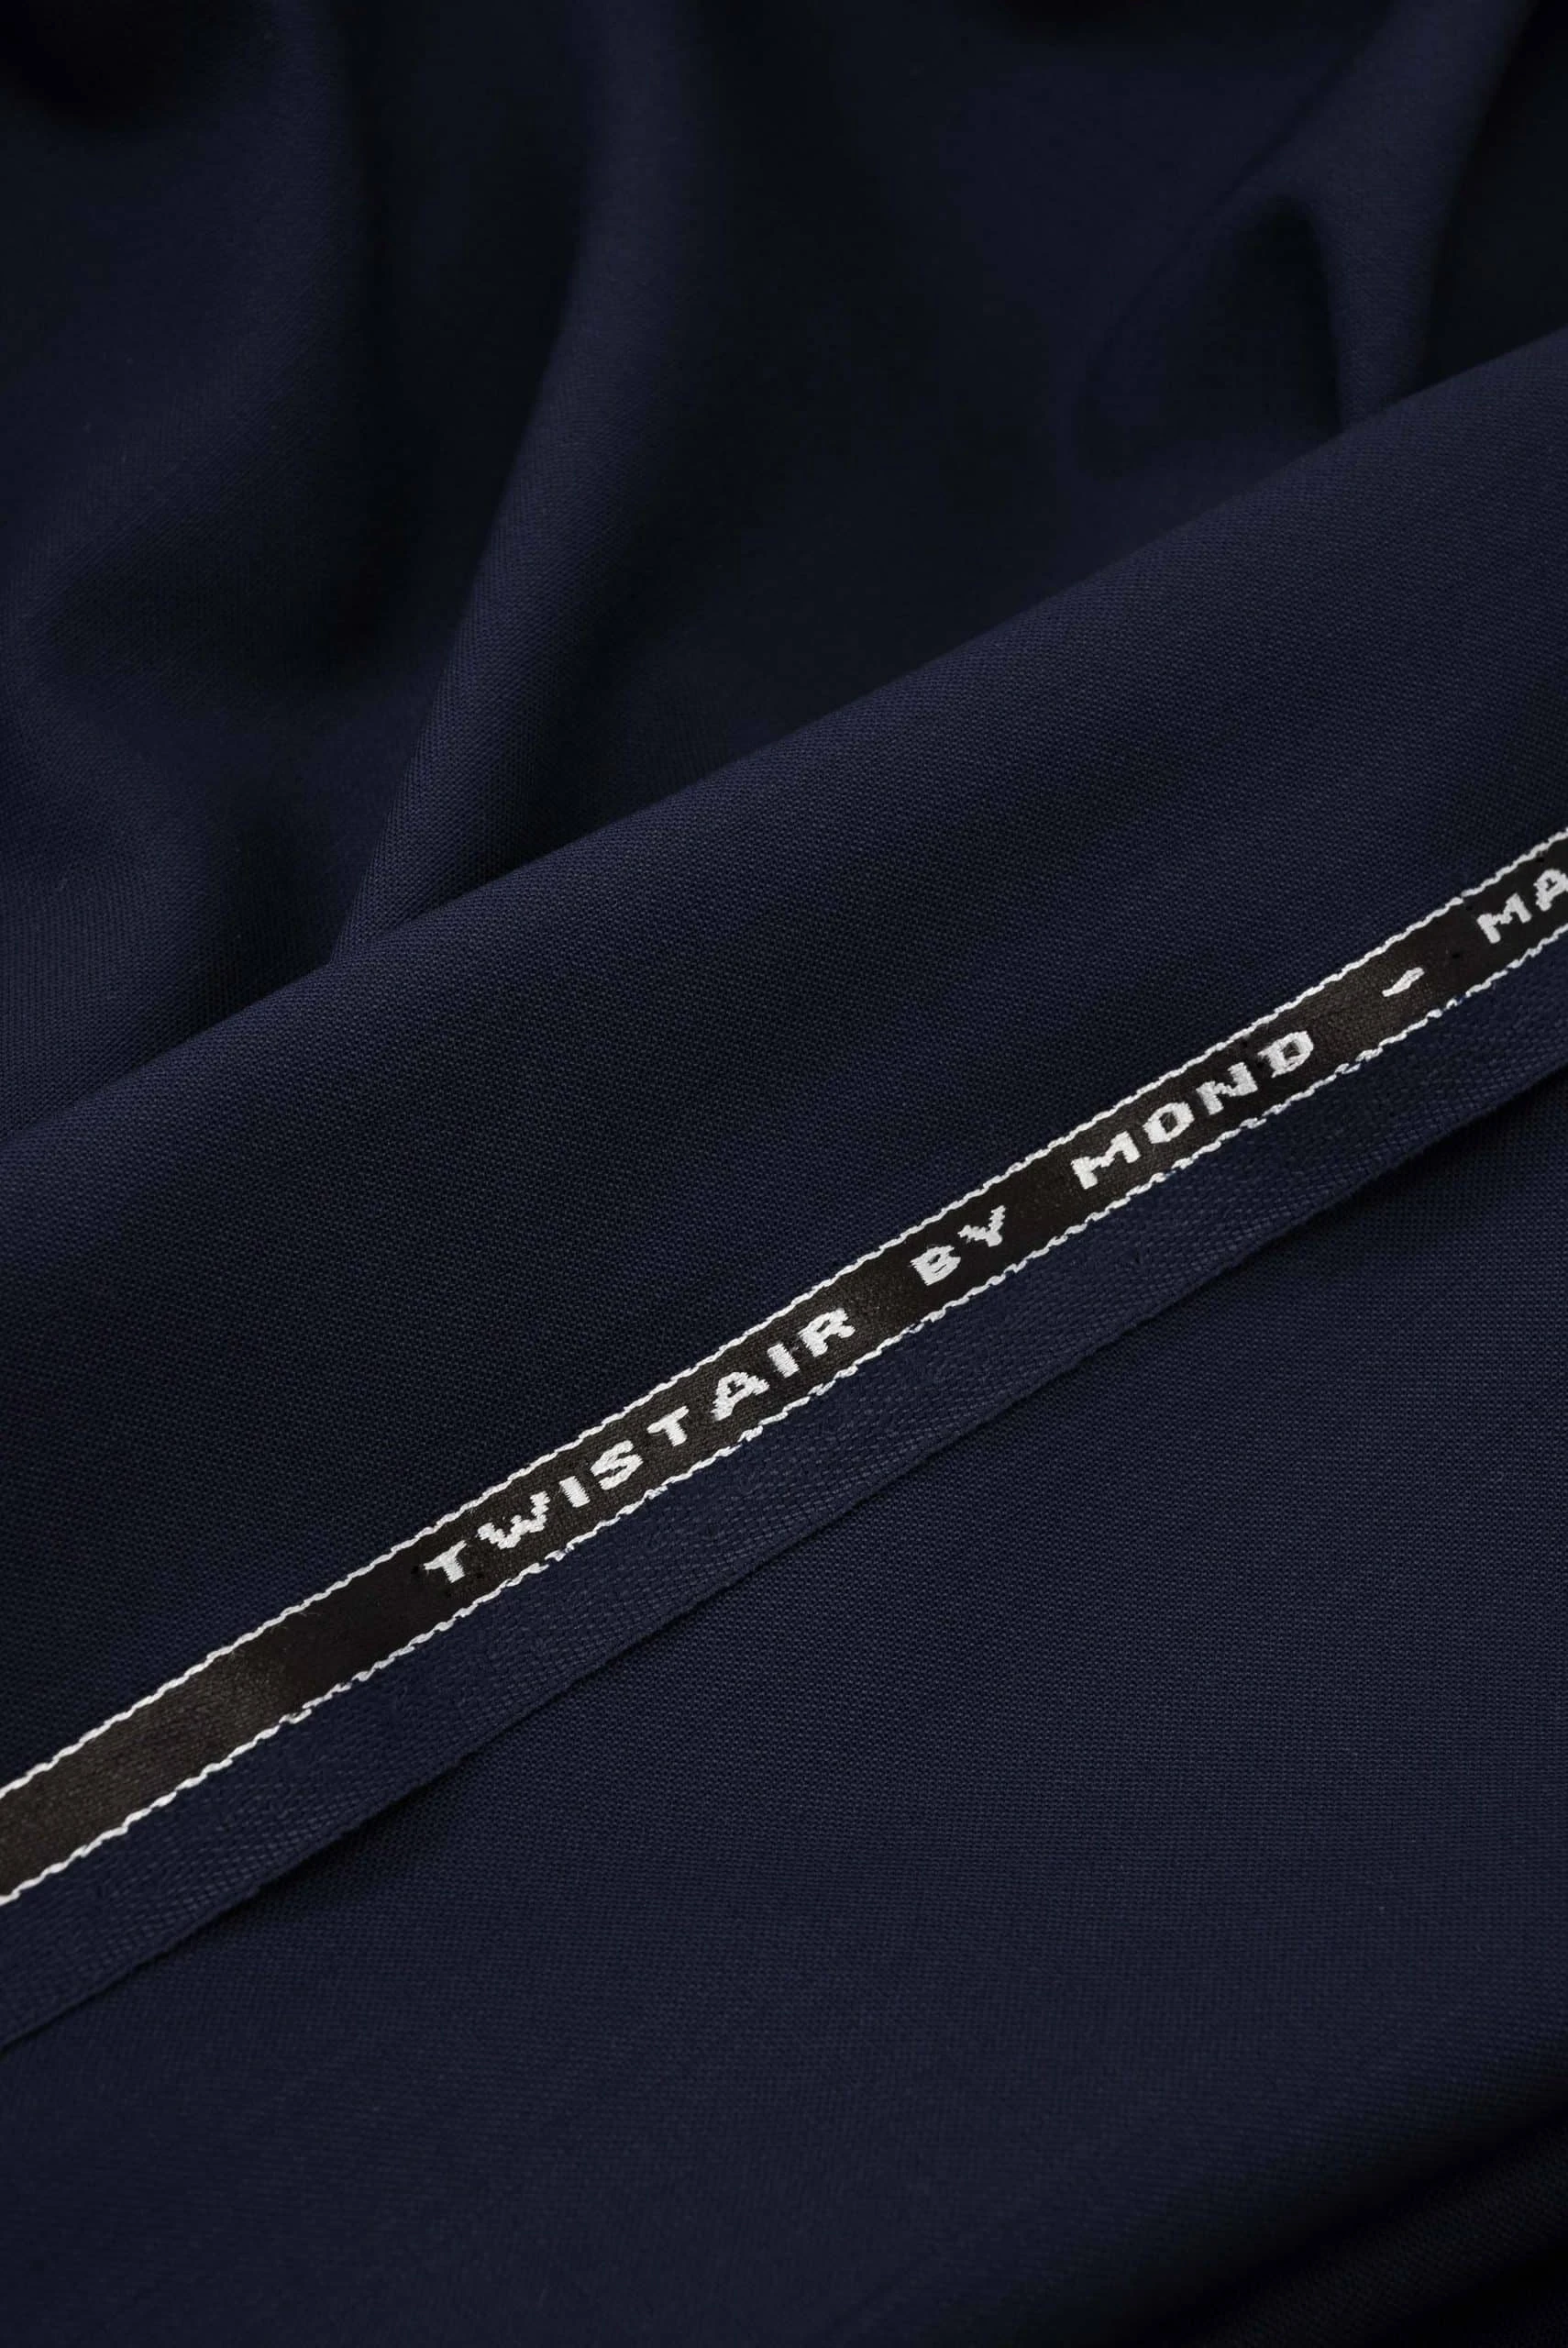 twistair suiting fabric by mond of copenhagen